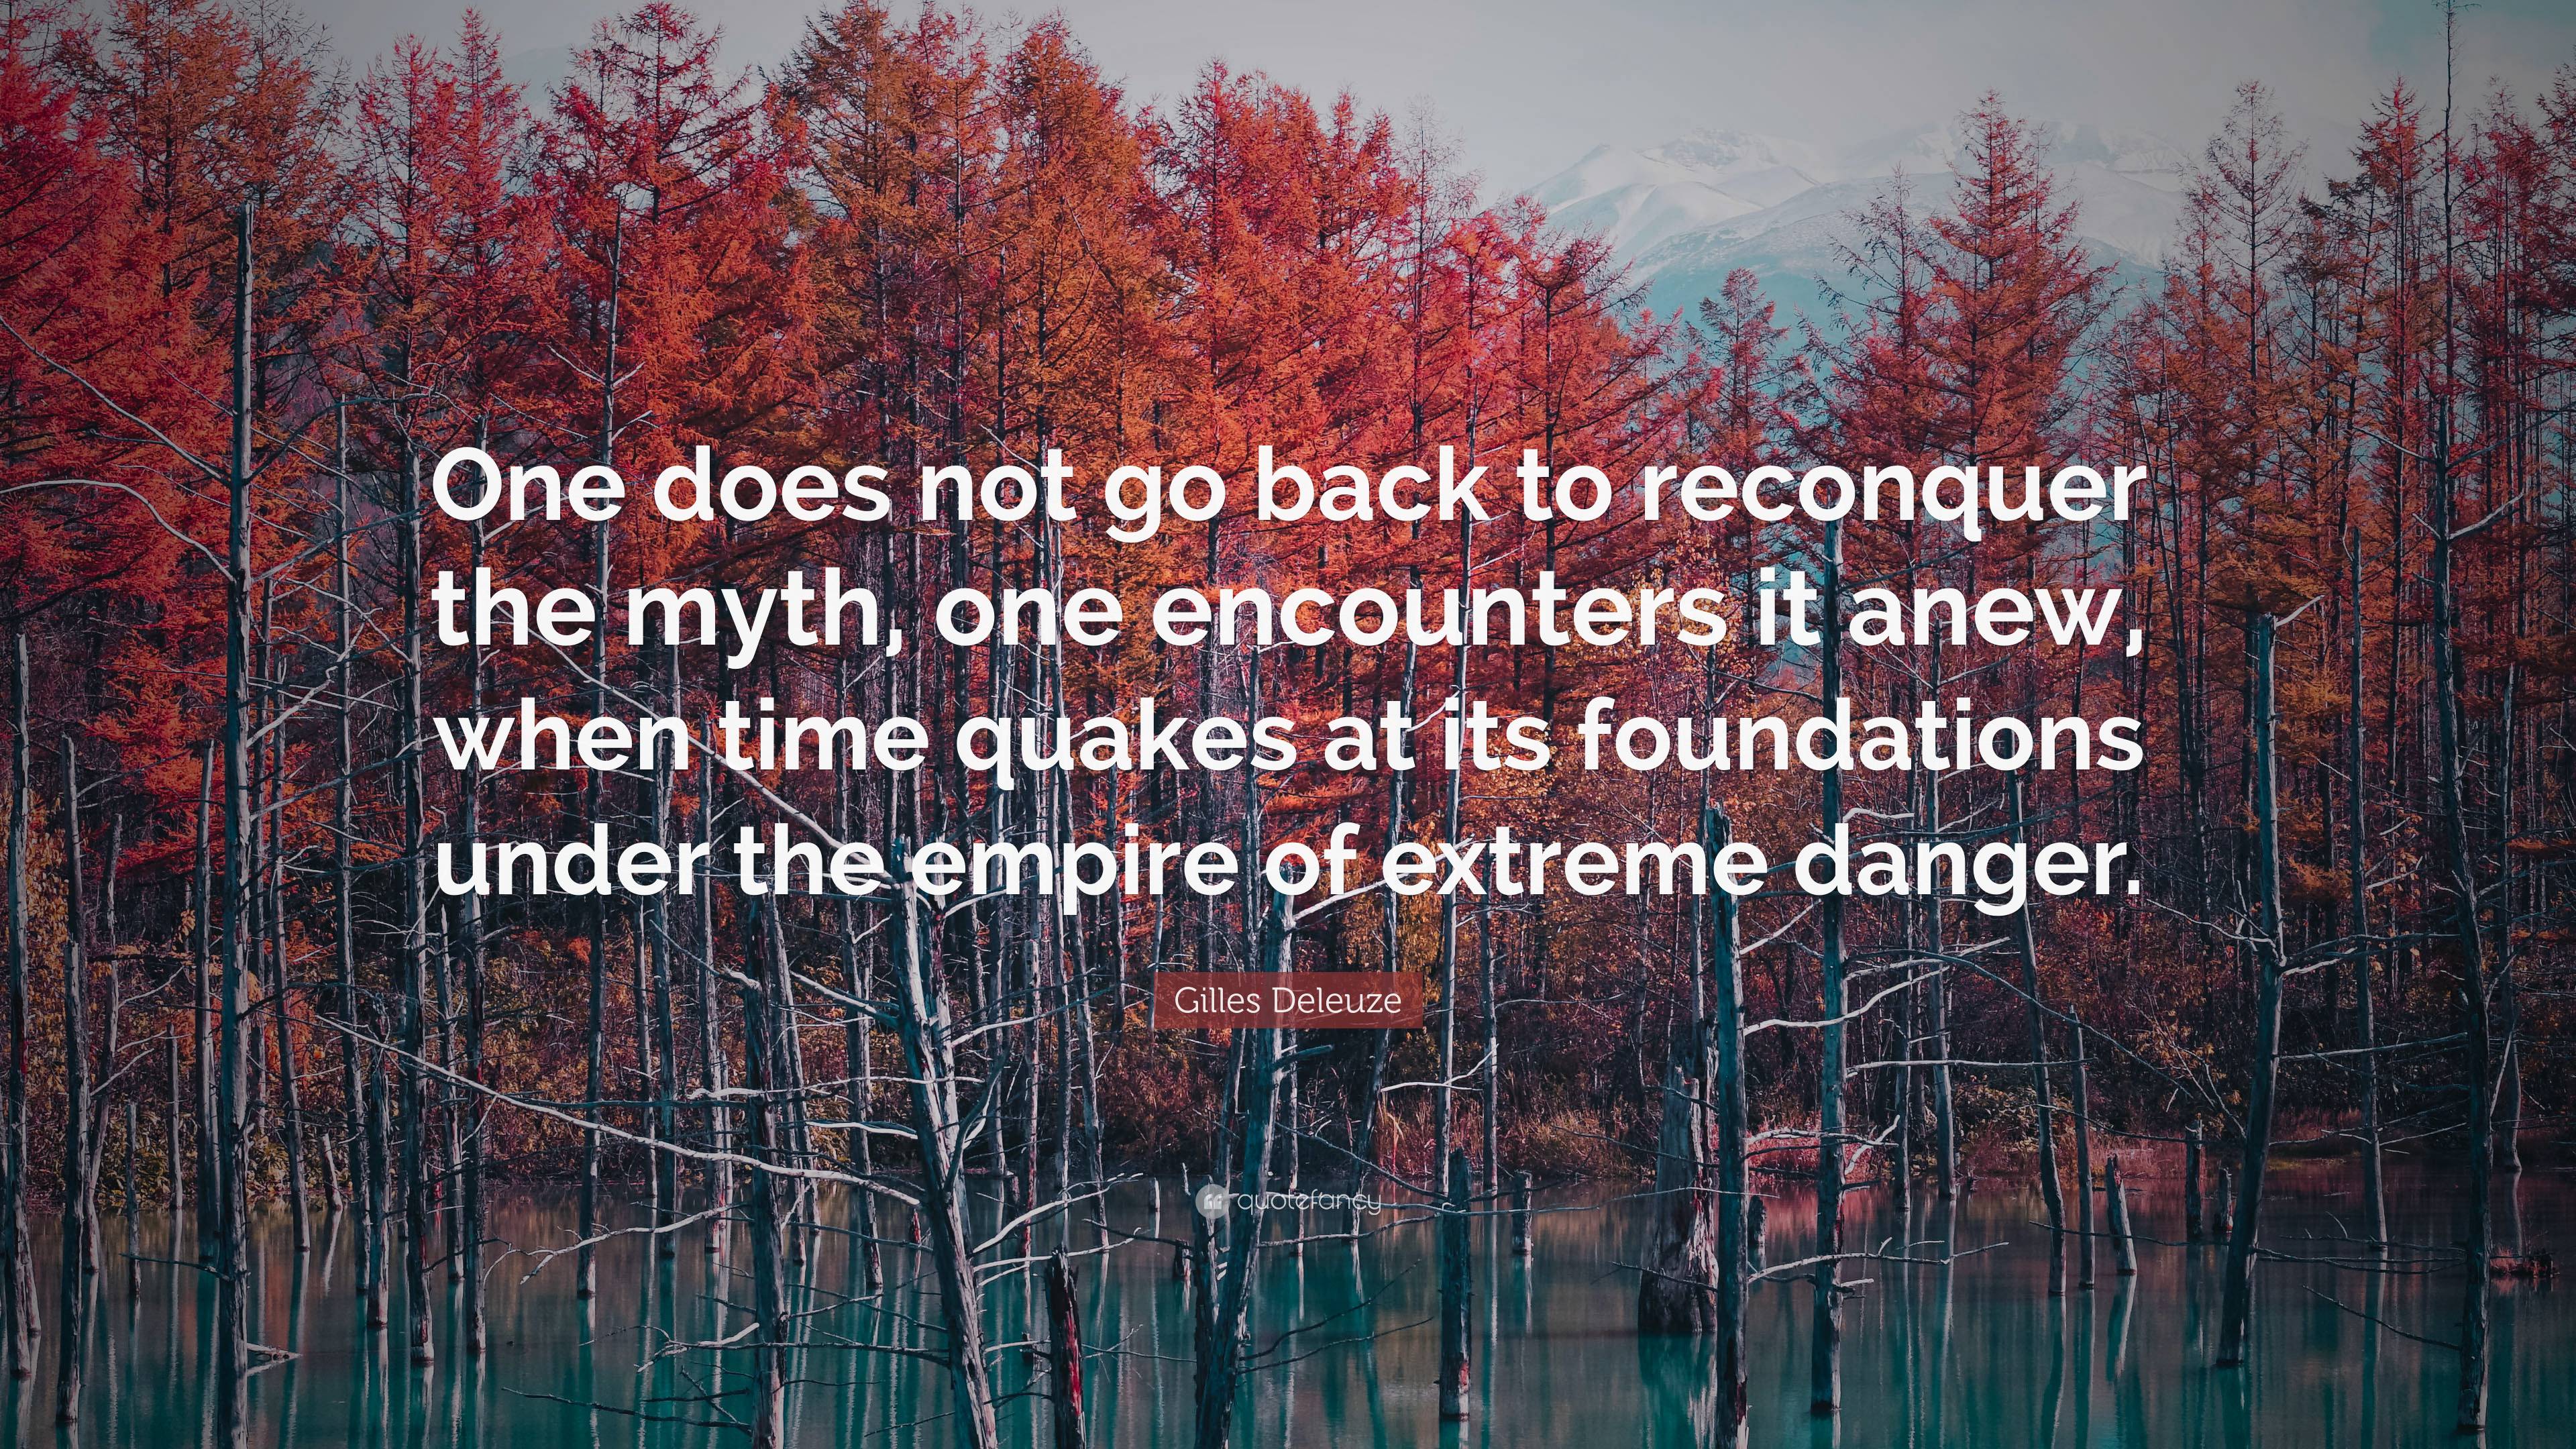 Gilles Deleuze Quote: “One does not go back to reconquer the myth, one ...